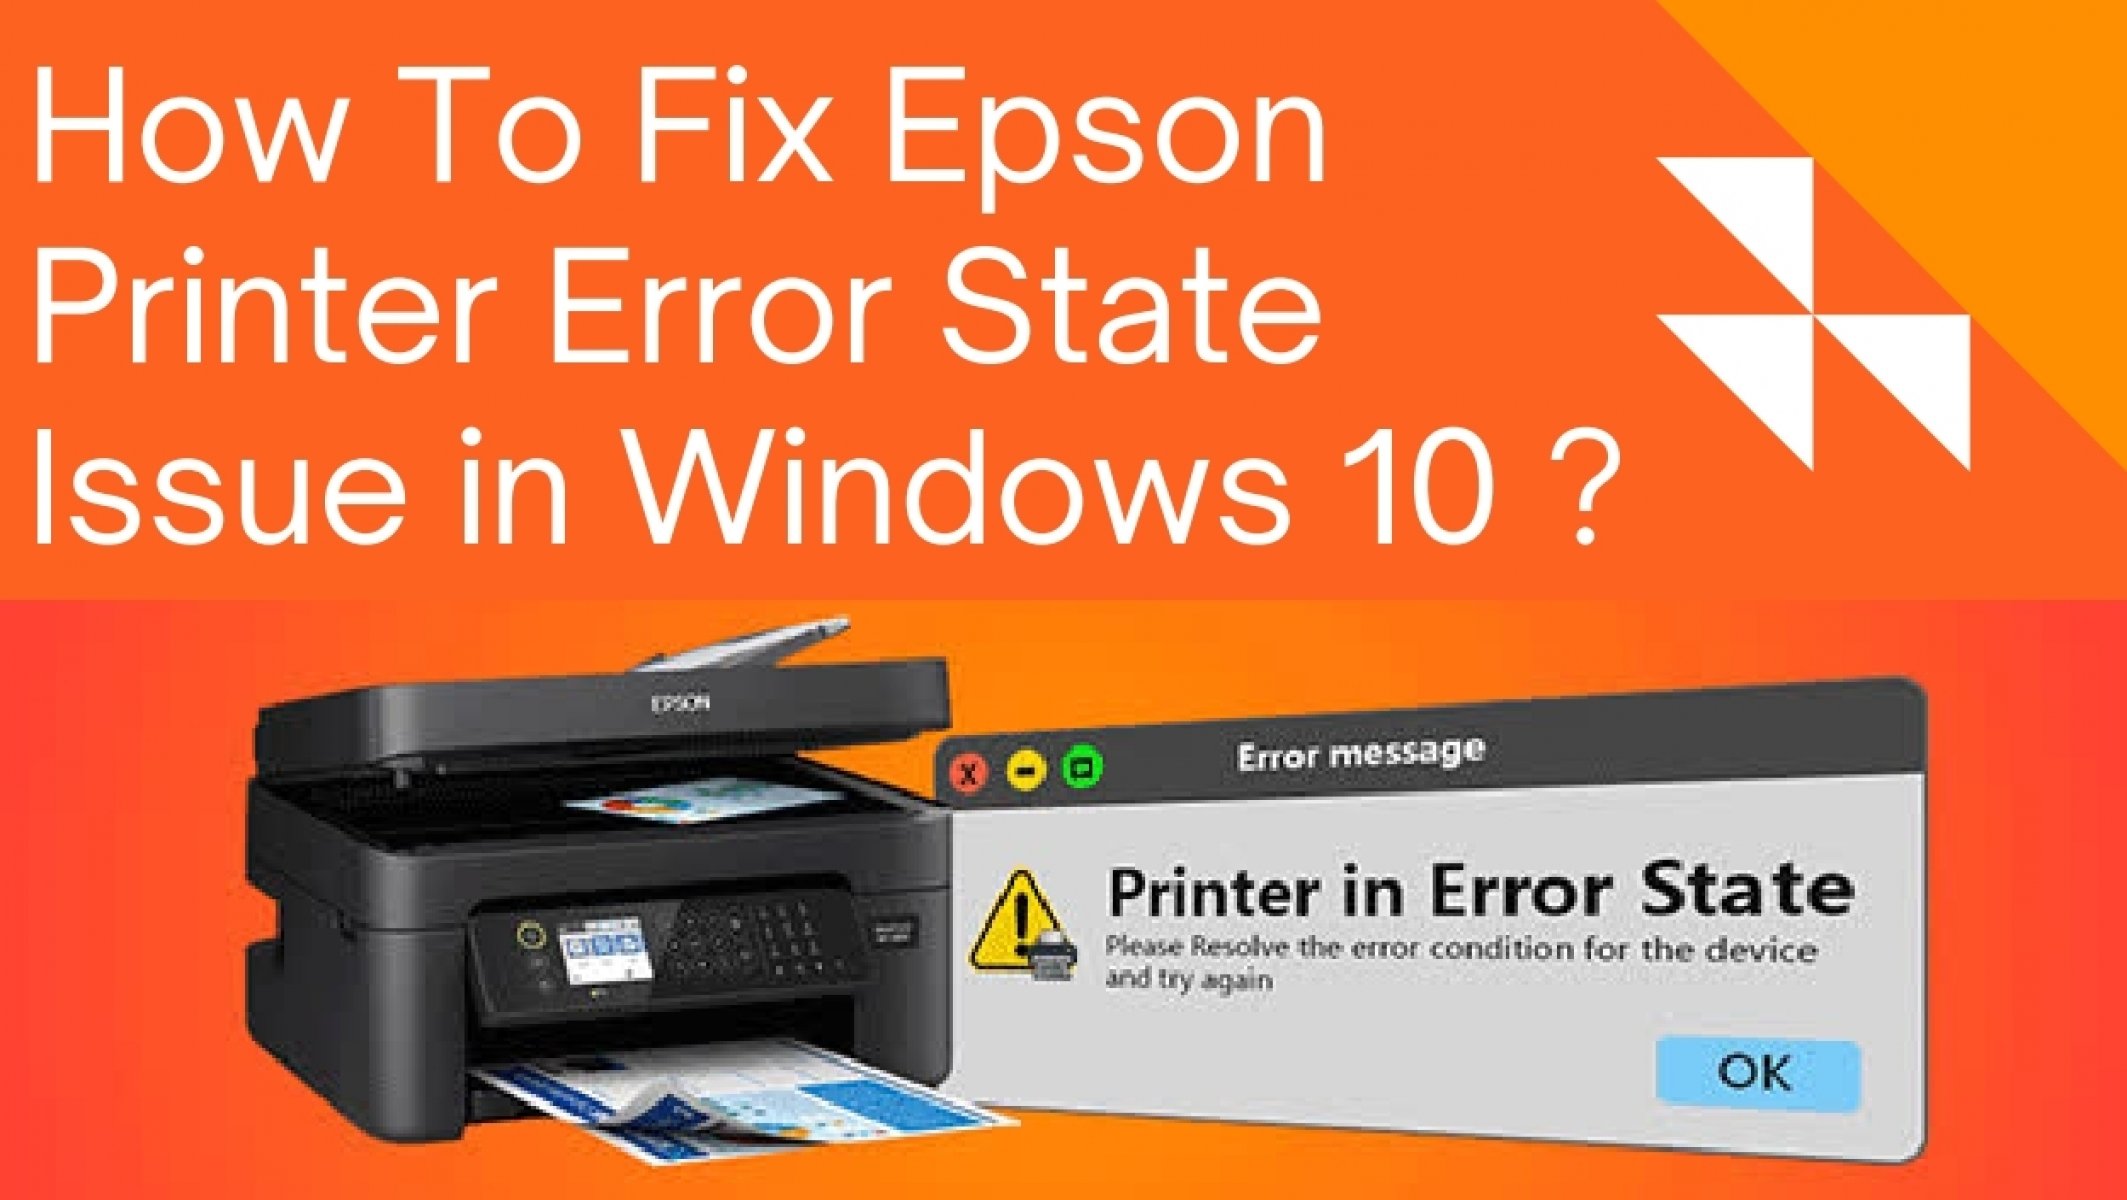 How To Fix Epson Printer Error State Issue In Windows 10 4477